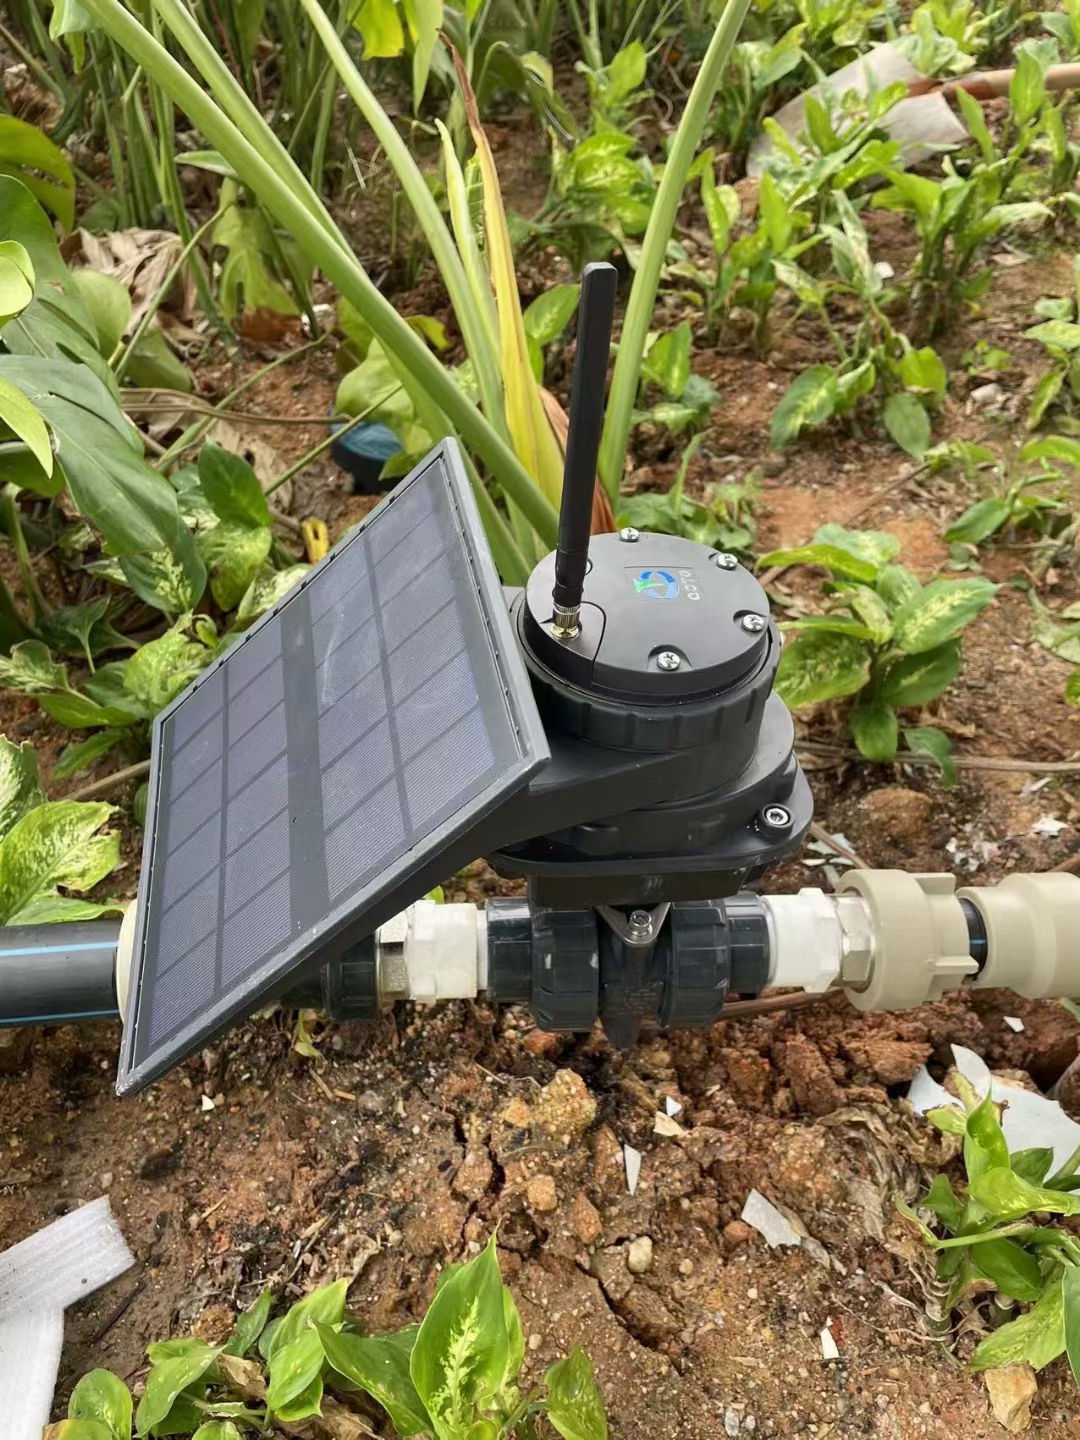 IoT/LoRa/4G Based Smart Water Irrigation System for pomegranate tree plantation